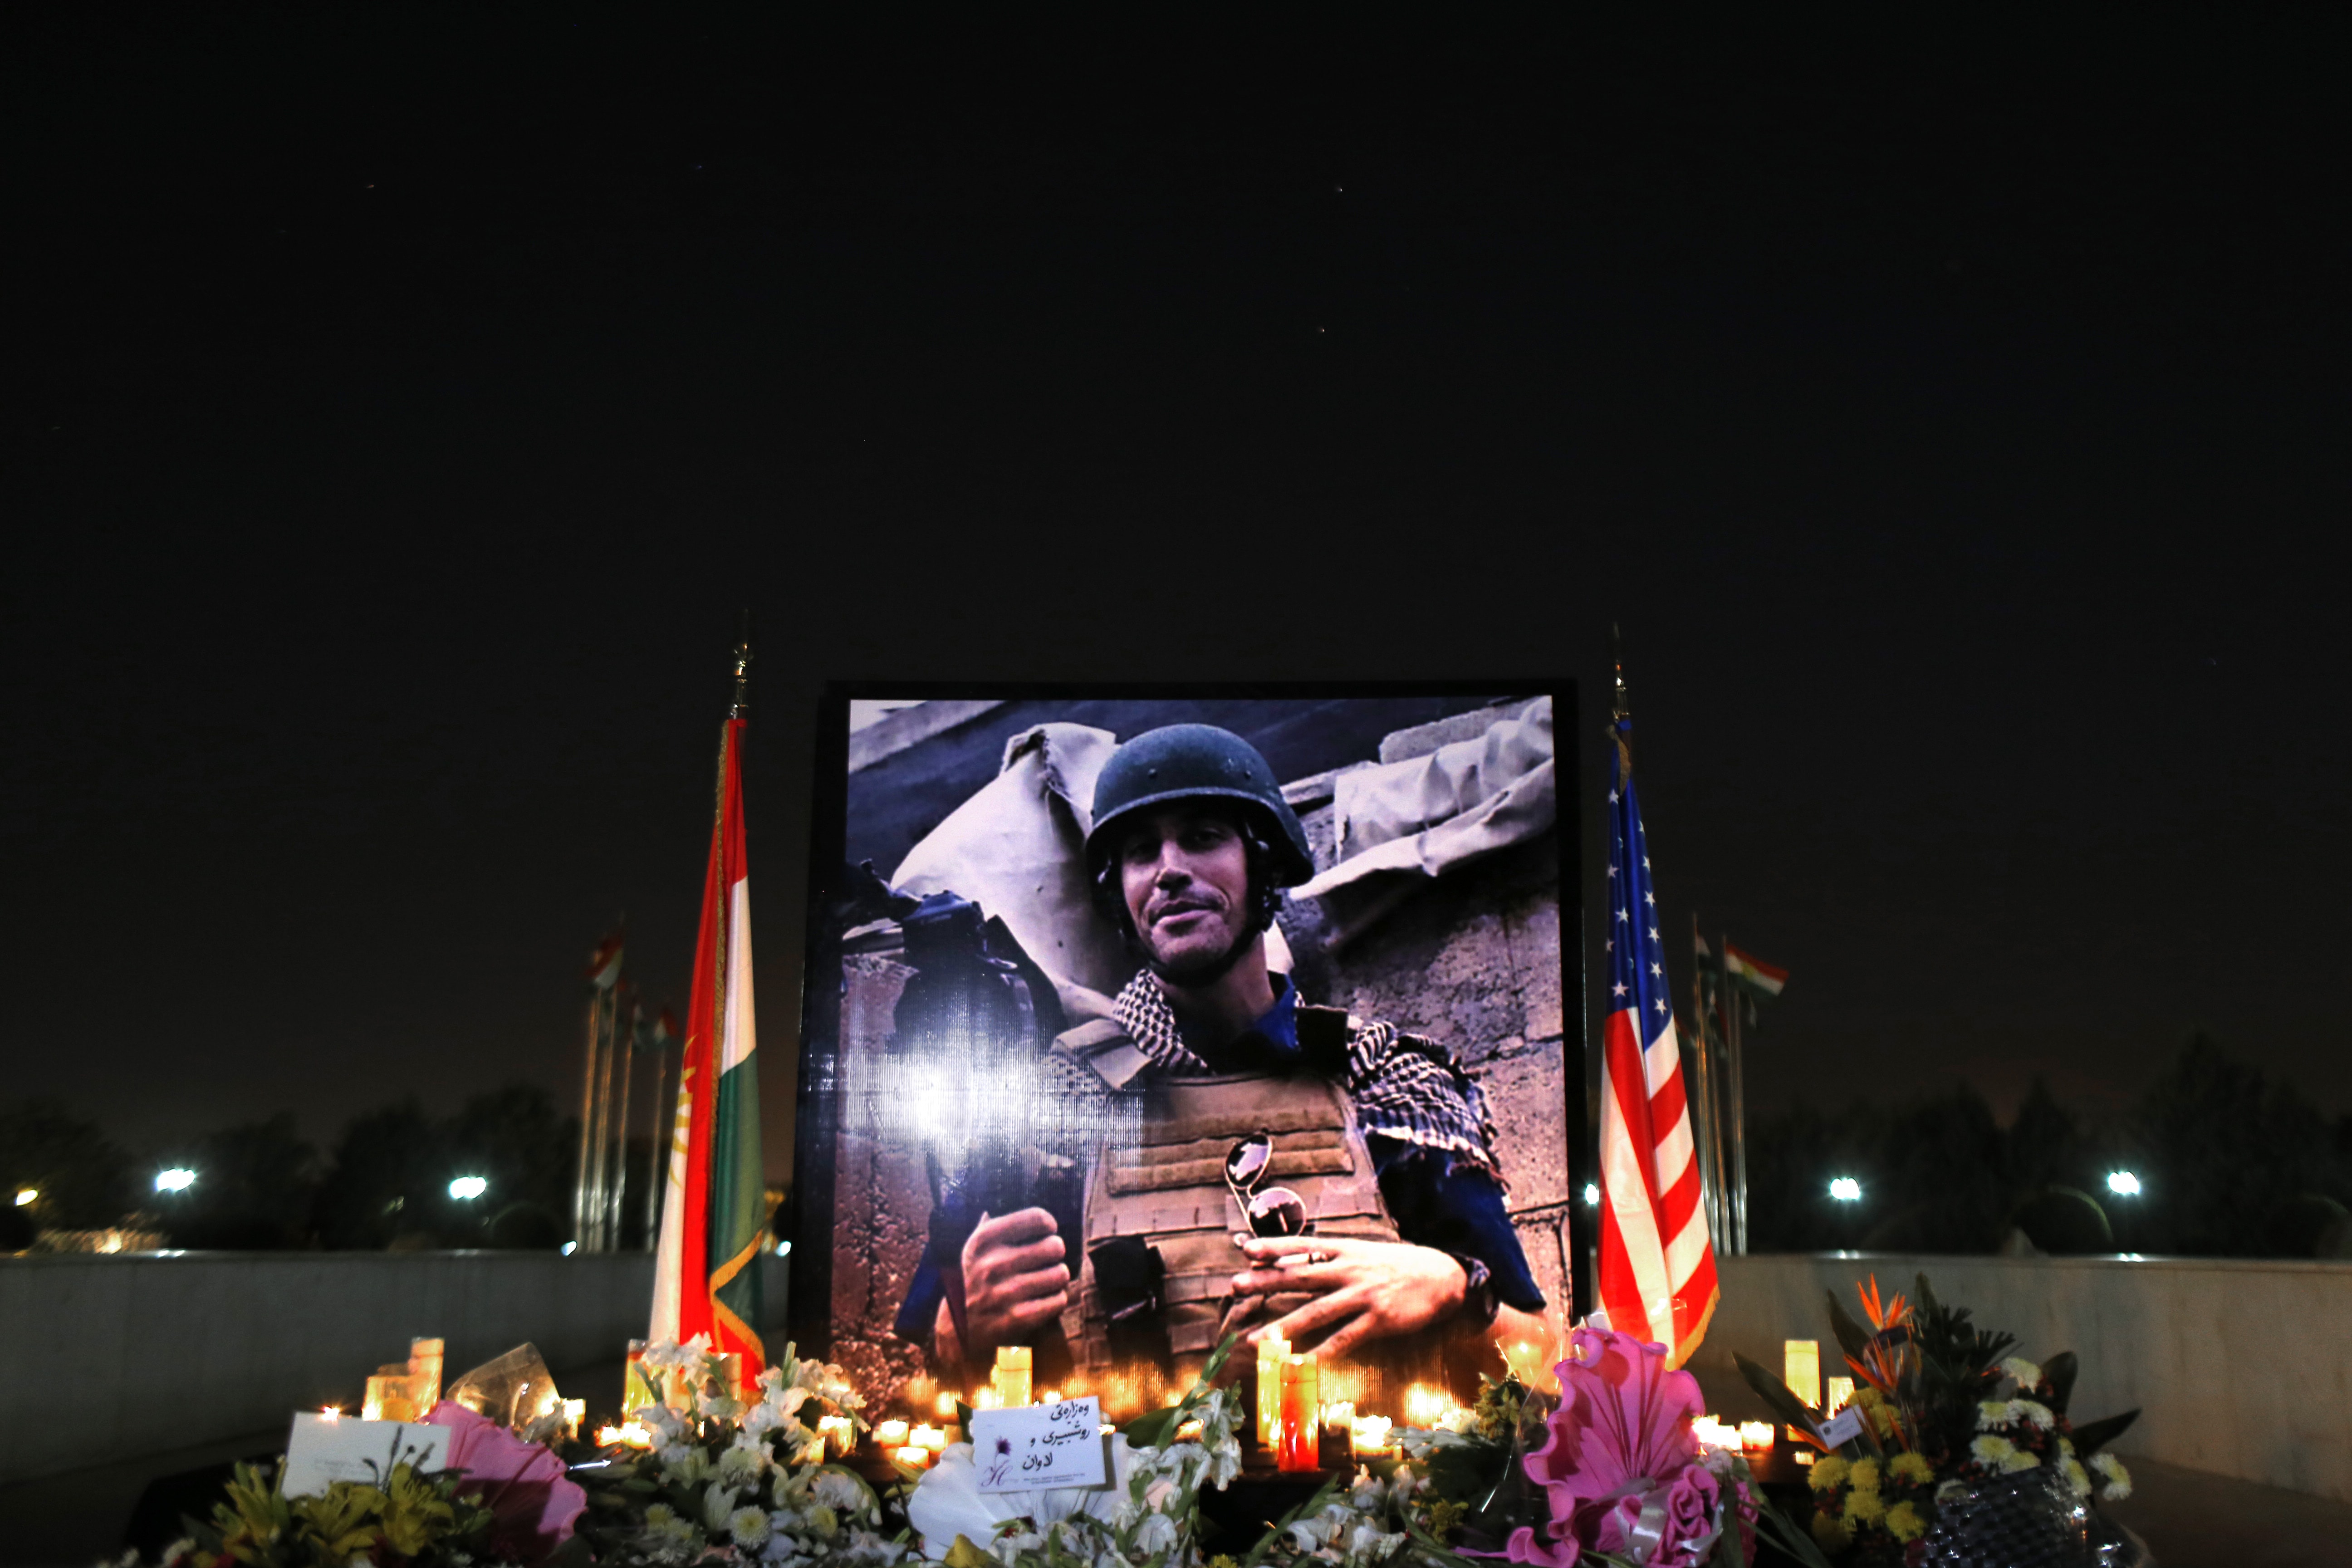 A photograph of James Foley is seen during a memorial service in Irbil, north of Baghdad, Iraq, on 24 August 2014, AP Photo/ Marko Drobnjakovic